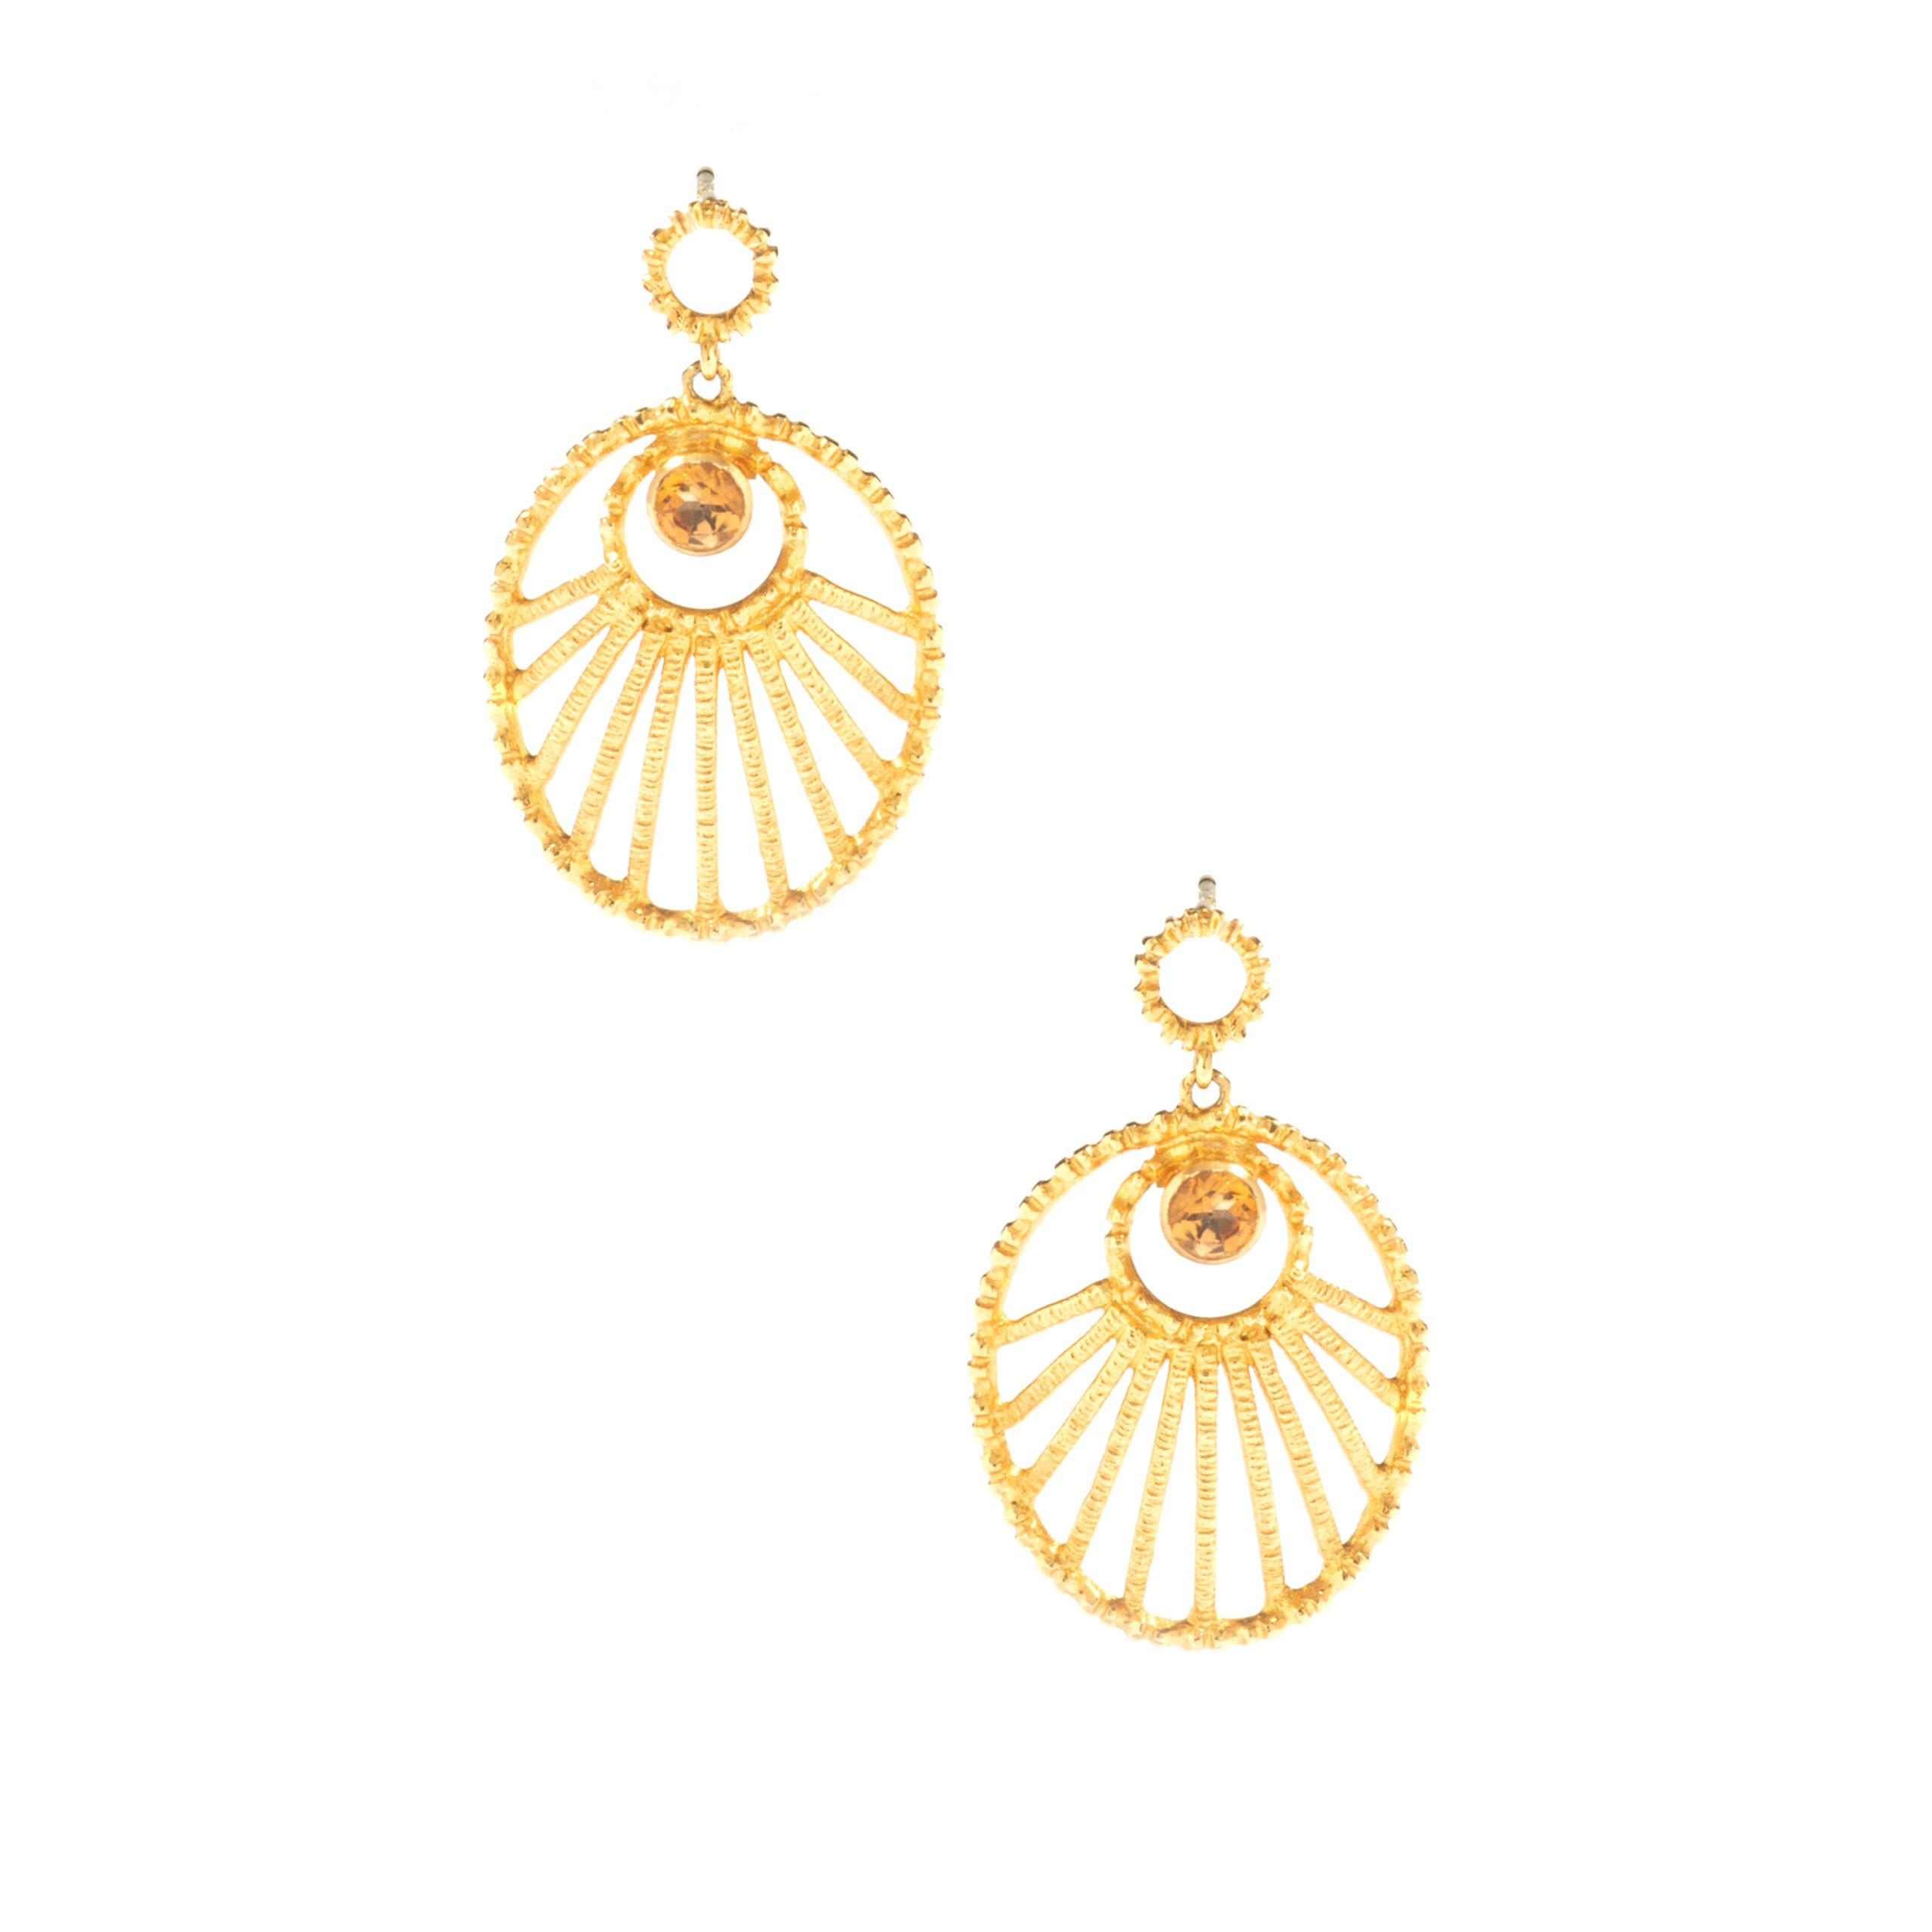 Lalaounis yellow gold 18K Earrings each one centered by a yellow stone round cut. Lalaounis maker's marks.